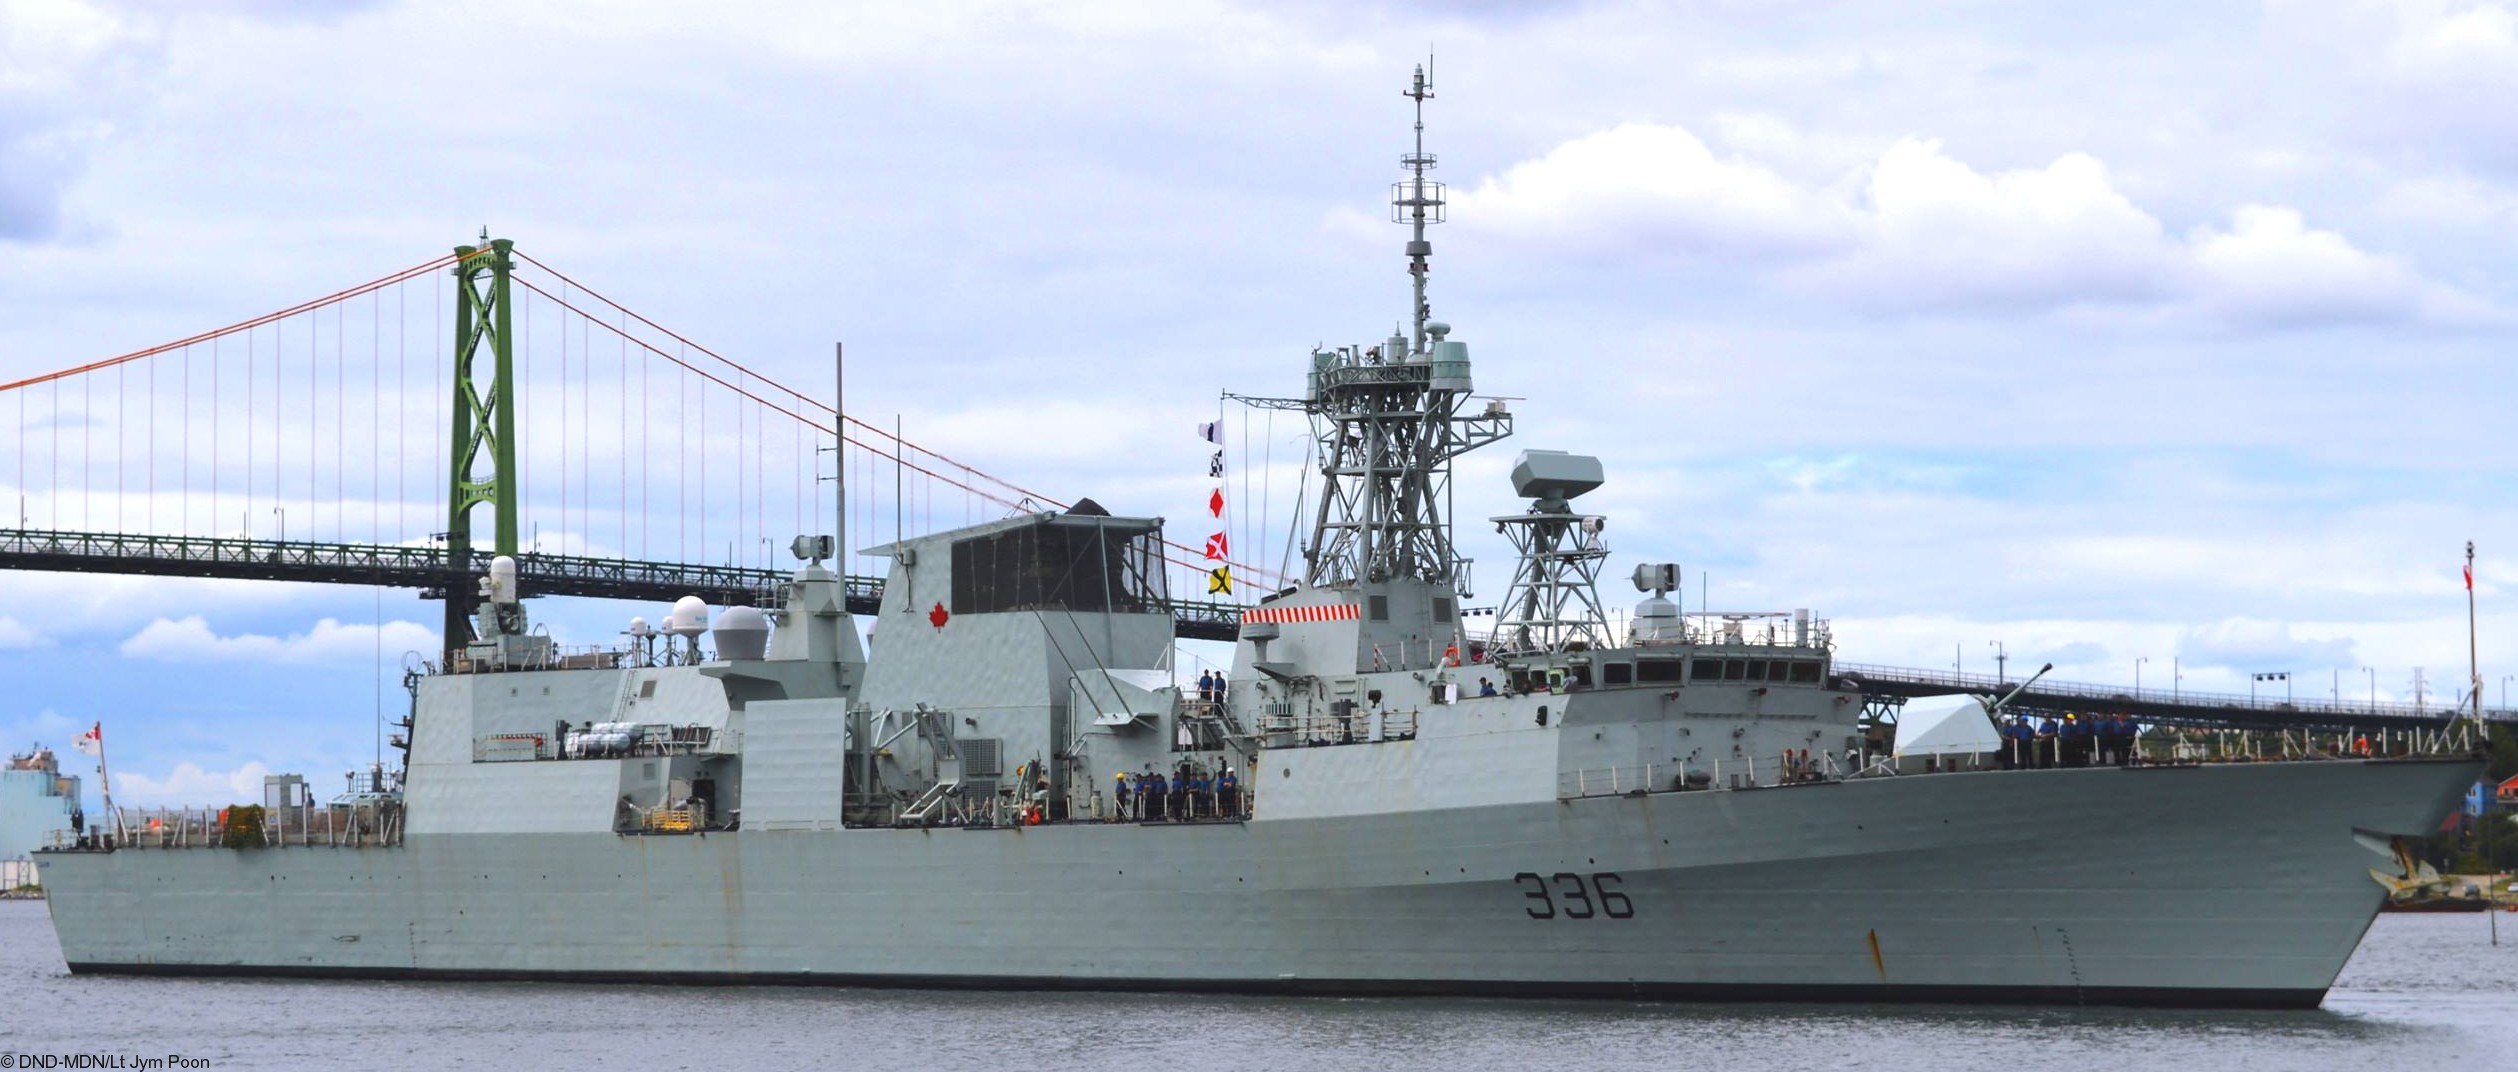 ffh-336 hmcs montreal halifax class helicopter patrol frigate ncsm royal canadian navy 41